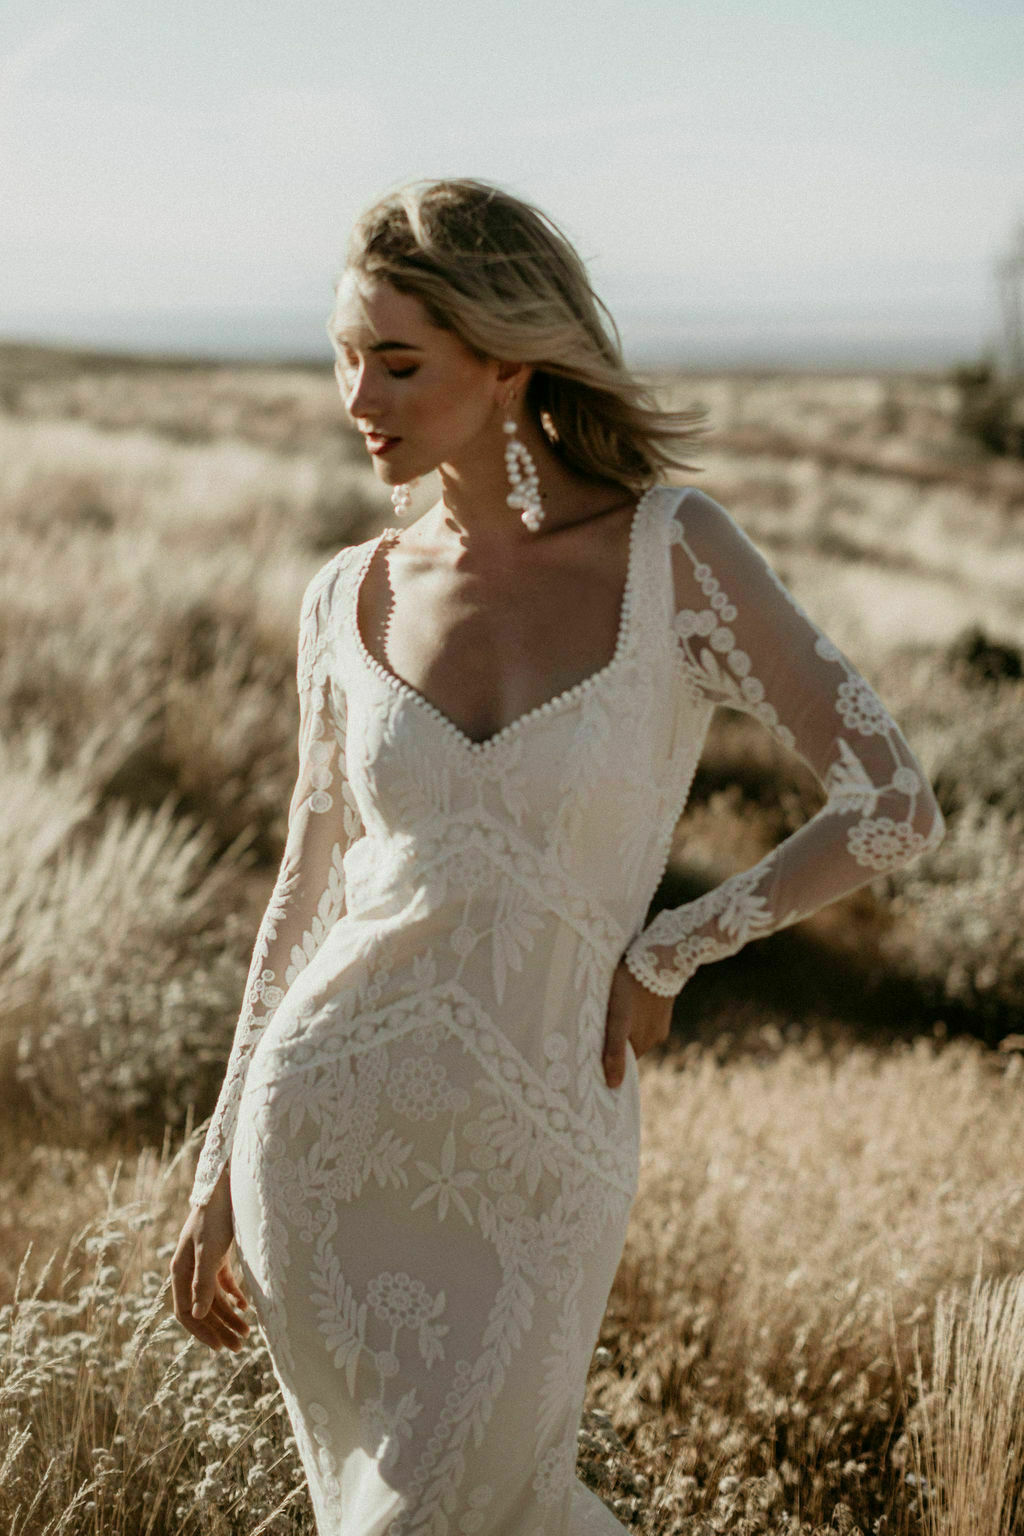 Violetta-unique-lace-wedding-dress-with-open-back-long-sleeves-and-dreamy-train-a-boho-bride's-dream